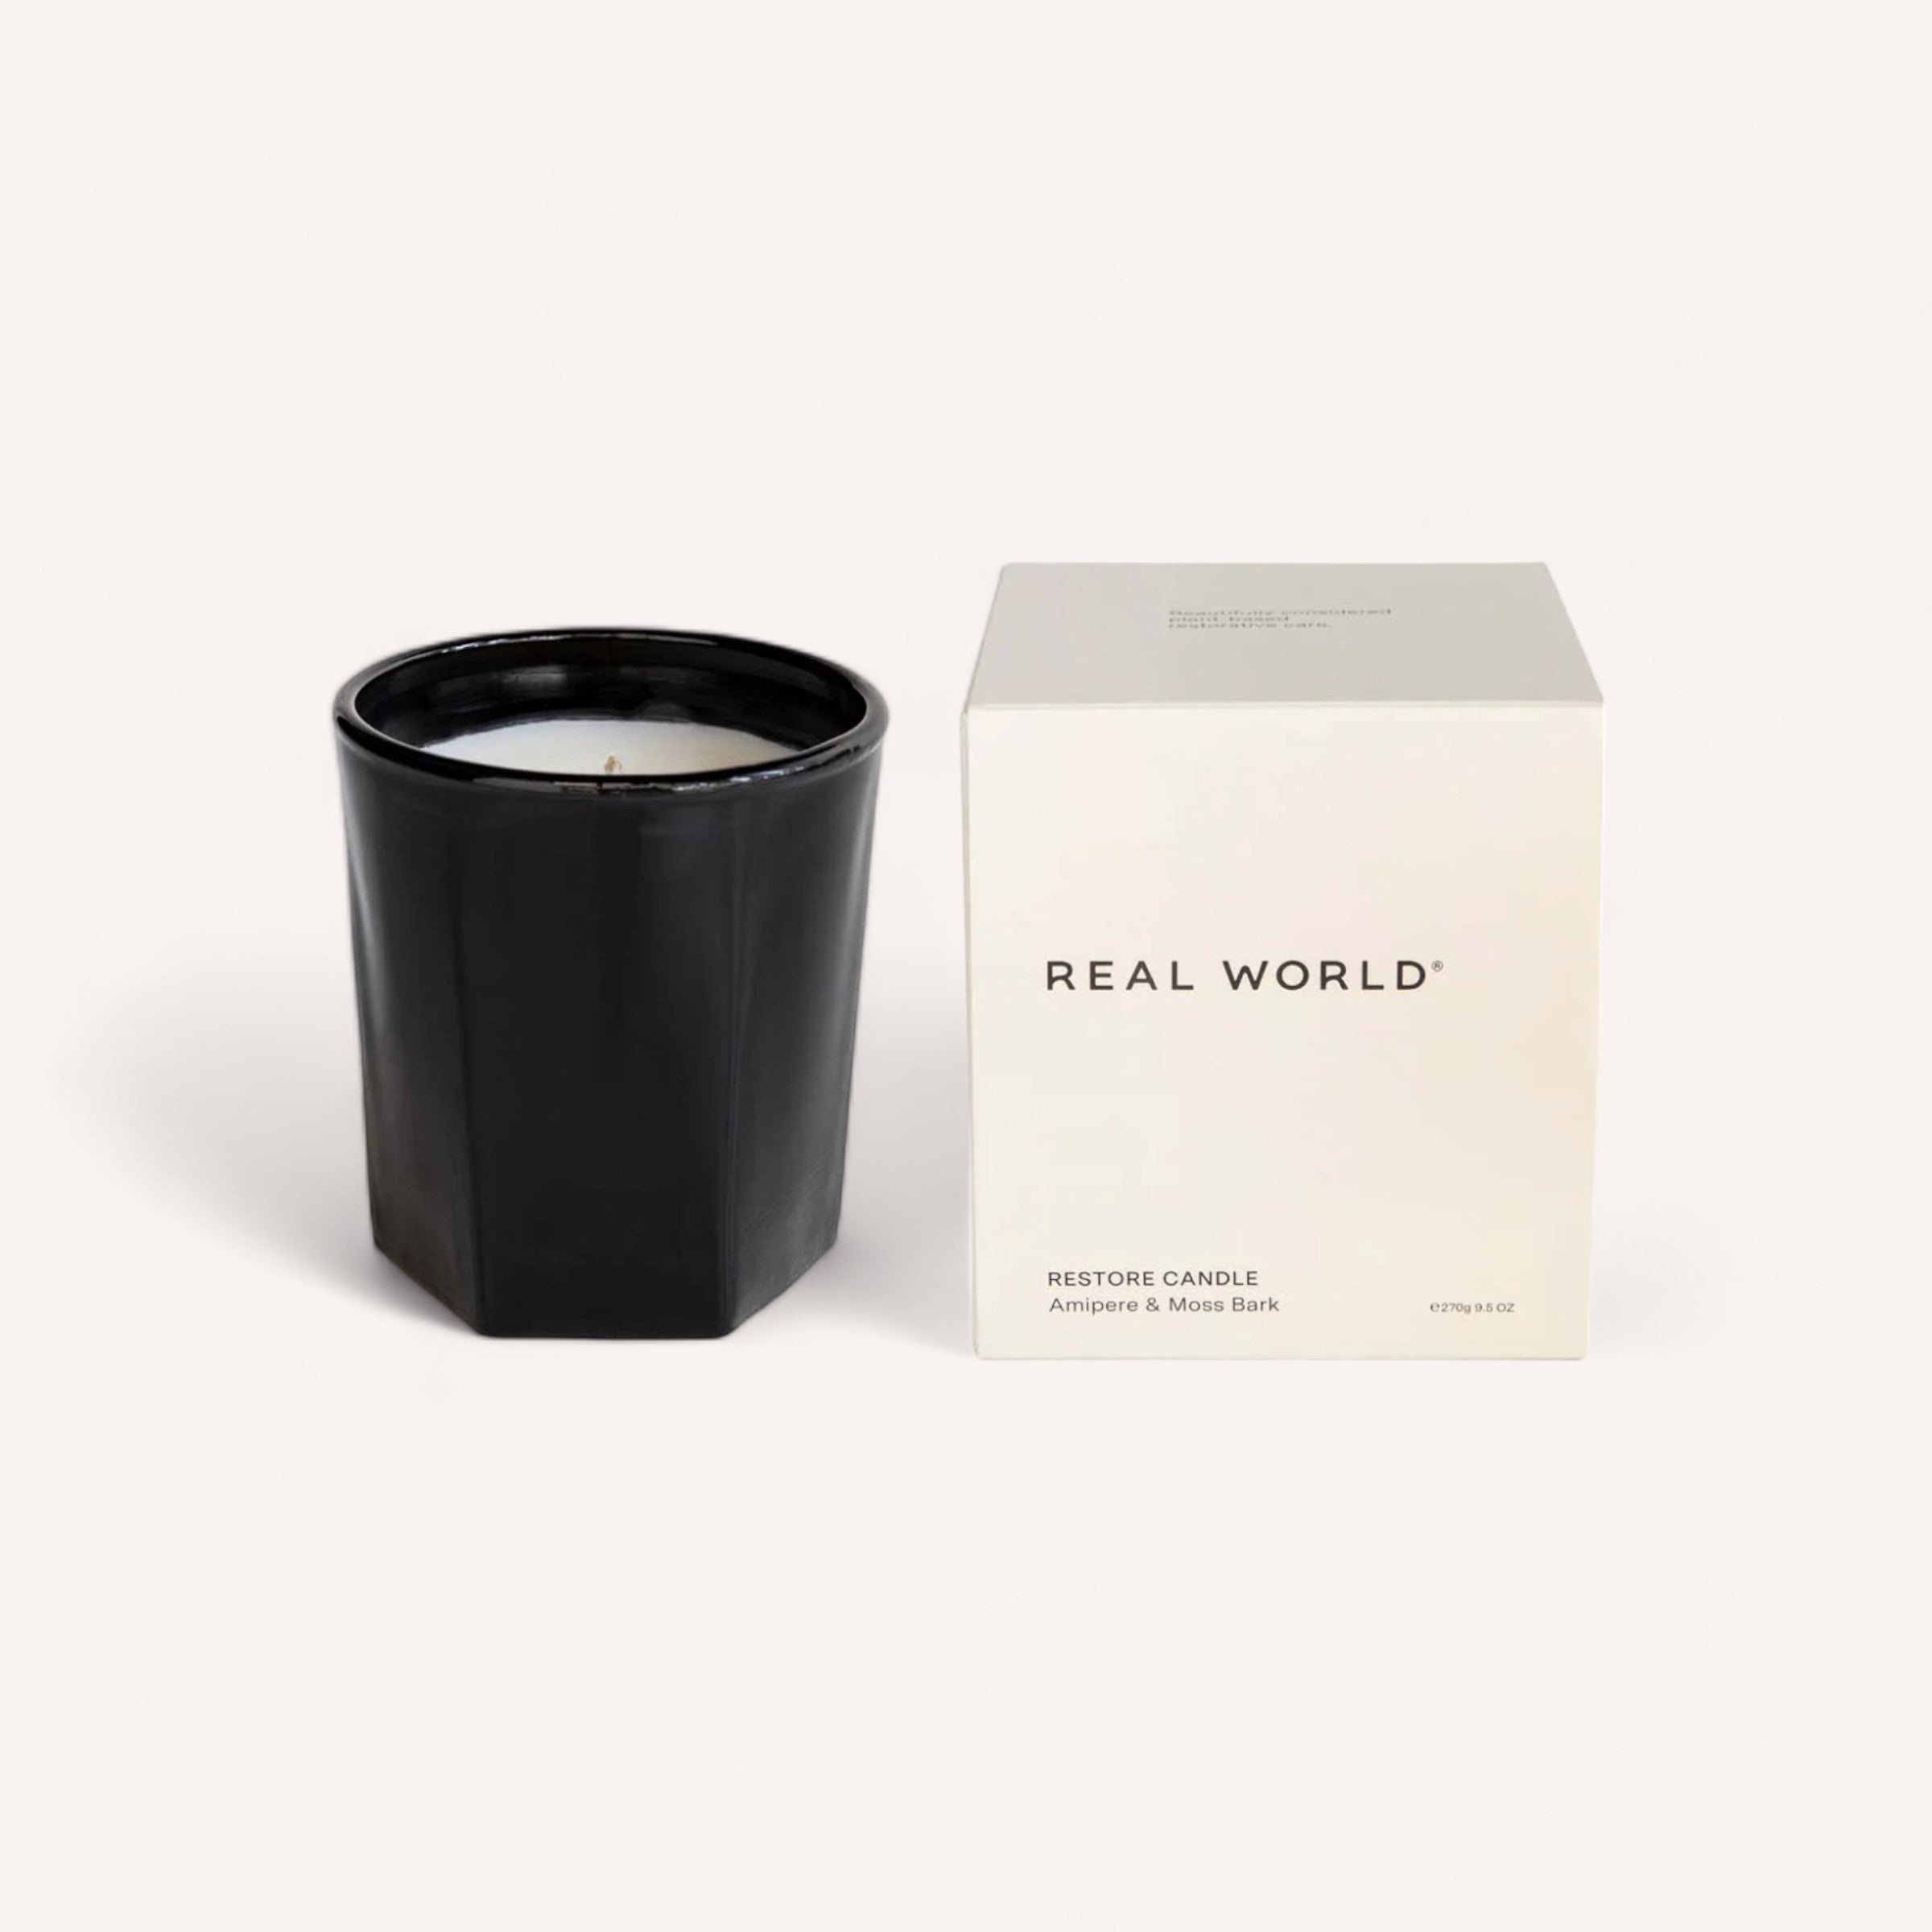 A black scented Amipere & Moss Bark candle by Real World next to its minimalist packaging with the label "real world, restore candle, amber & moss bark," a sustainable choice.